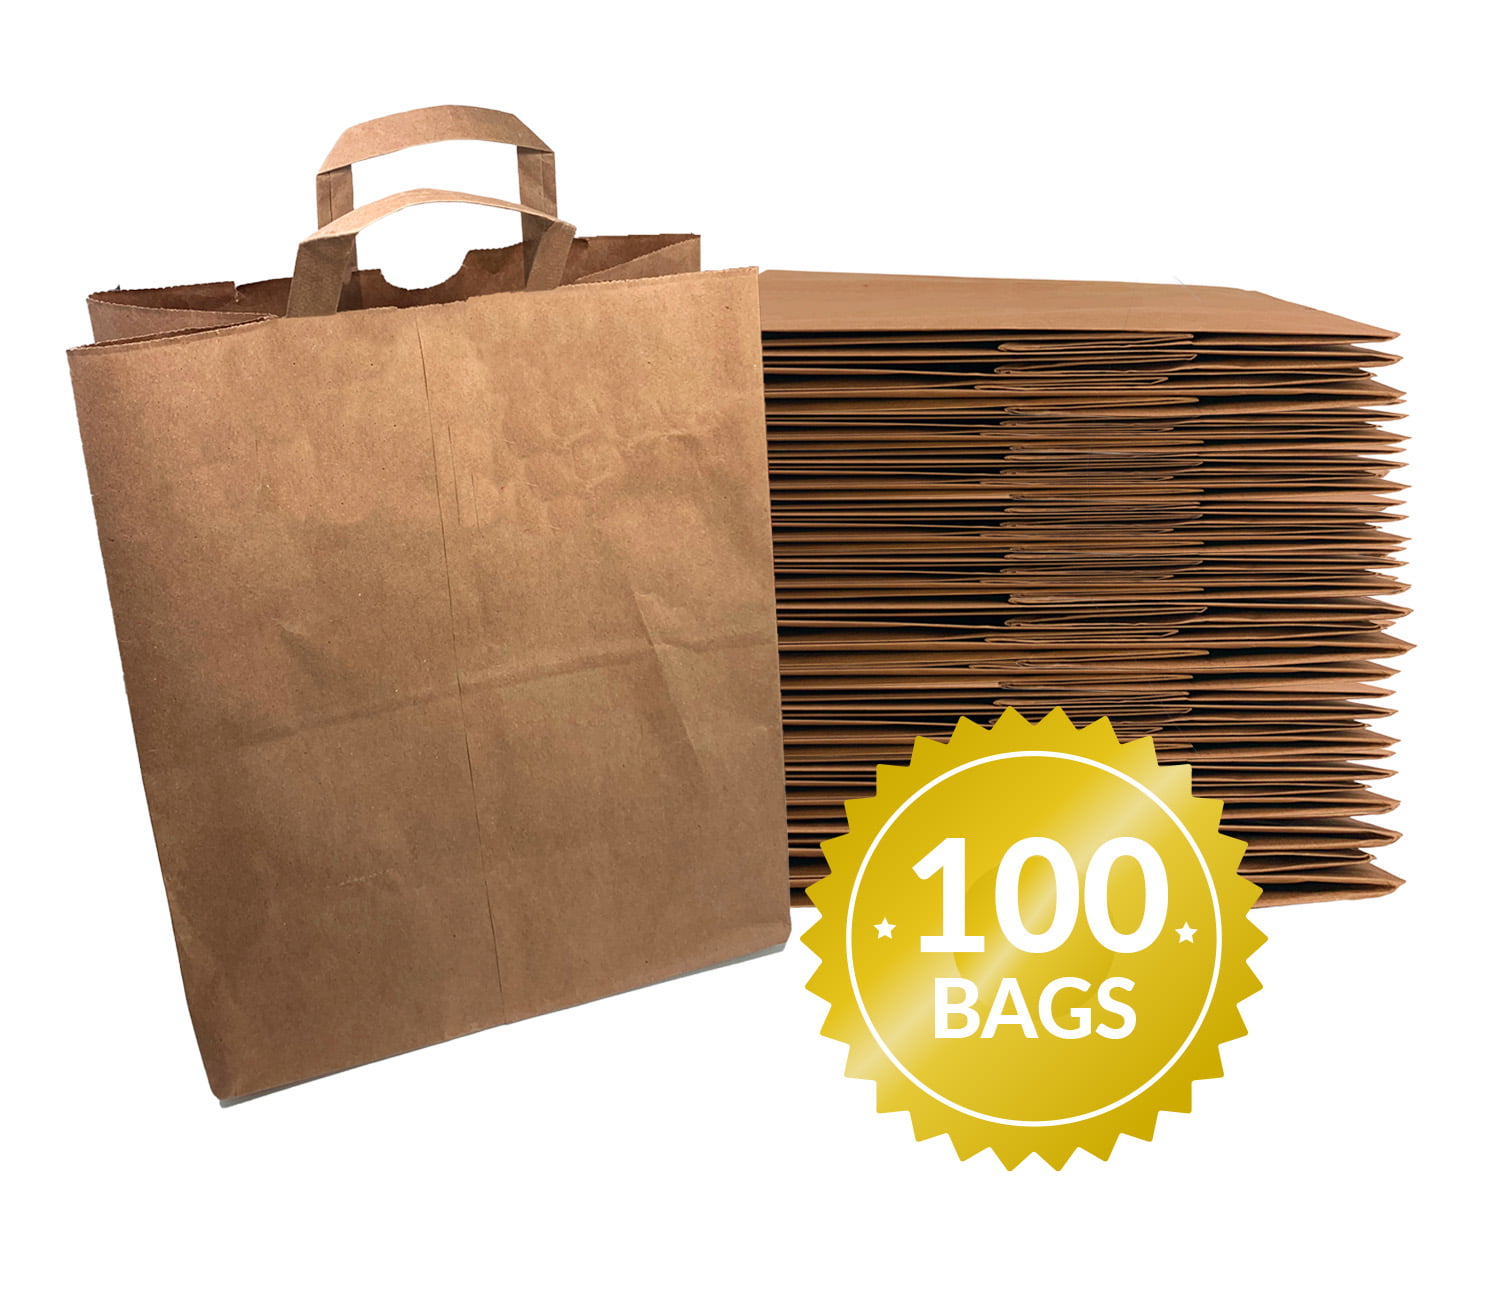 Reli. Paper Grocery Bags (100 (12"x7"x14") Large Paper Grocery Bags, Shopping Bags w/Handles - Heavy Duty 57 Lbs Basis - Go Retail Bags, Brown Kraft Paper Bags -